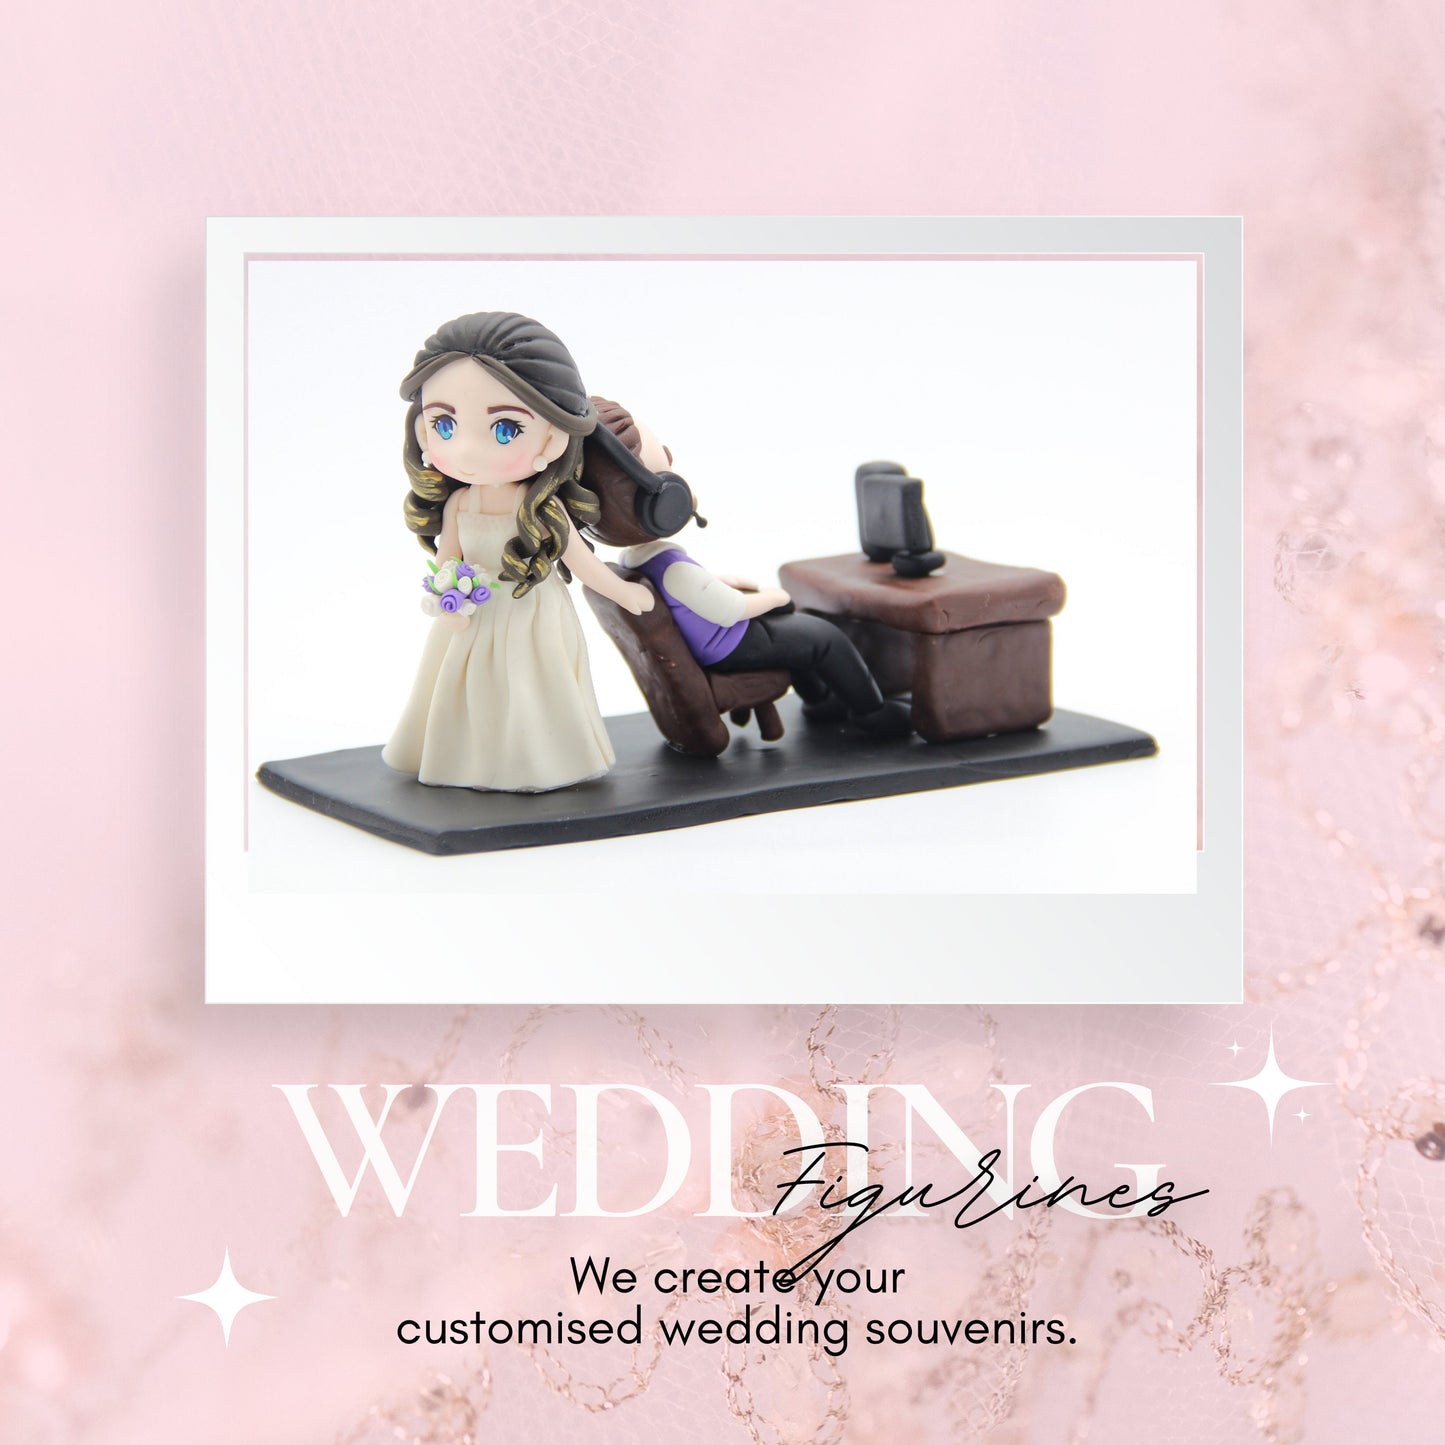 Video Game INSPIRED Funny Custom Made Wedding Cake Topper of Gamer Junkie Gaming Addict Bride and Groom Clay Figurines